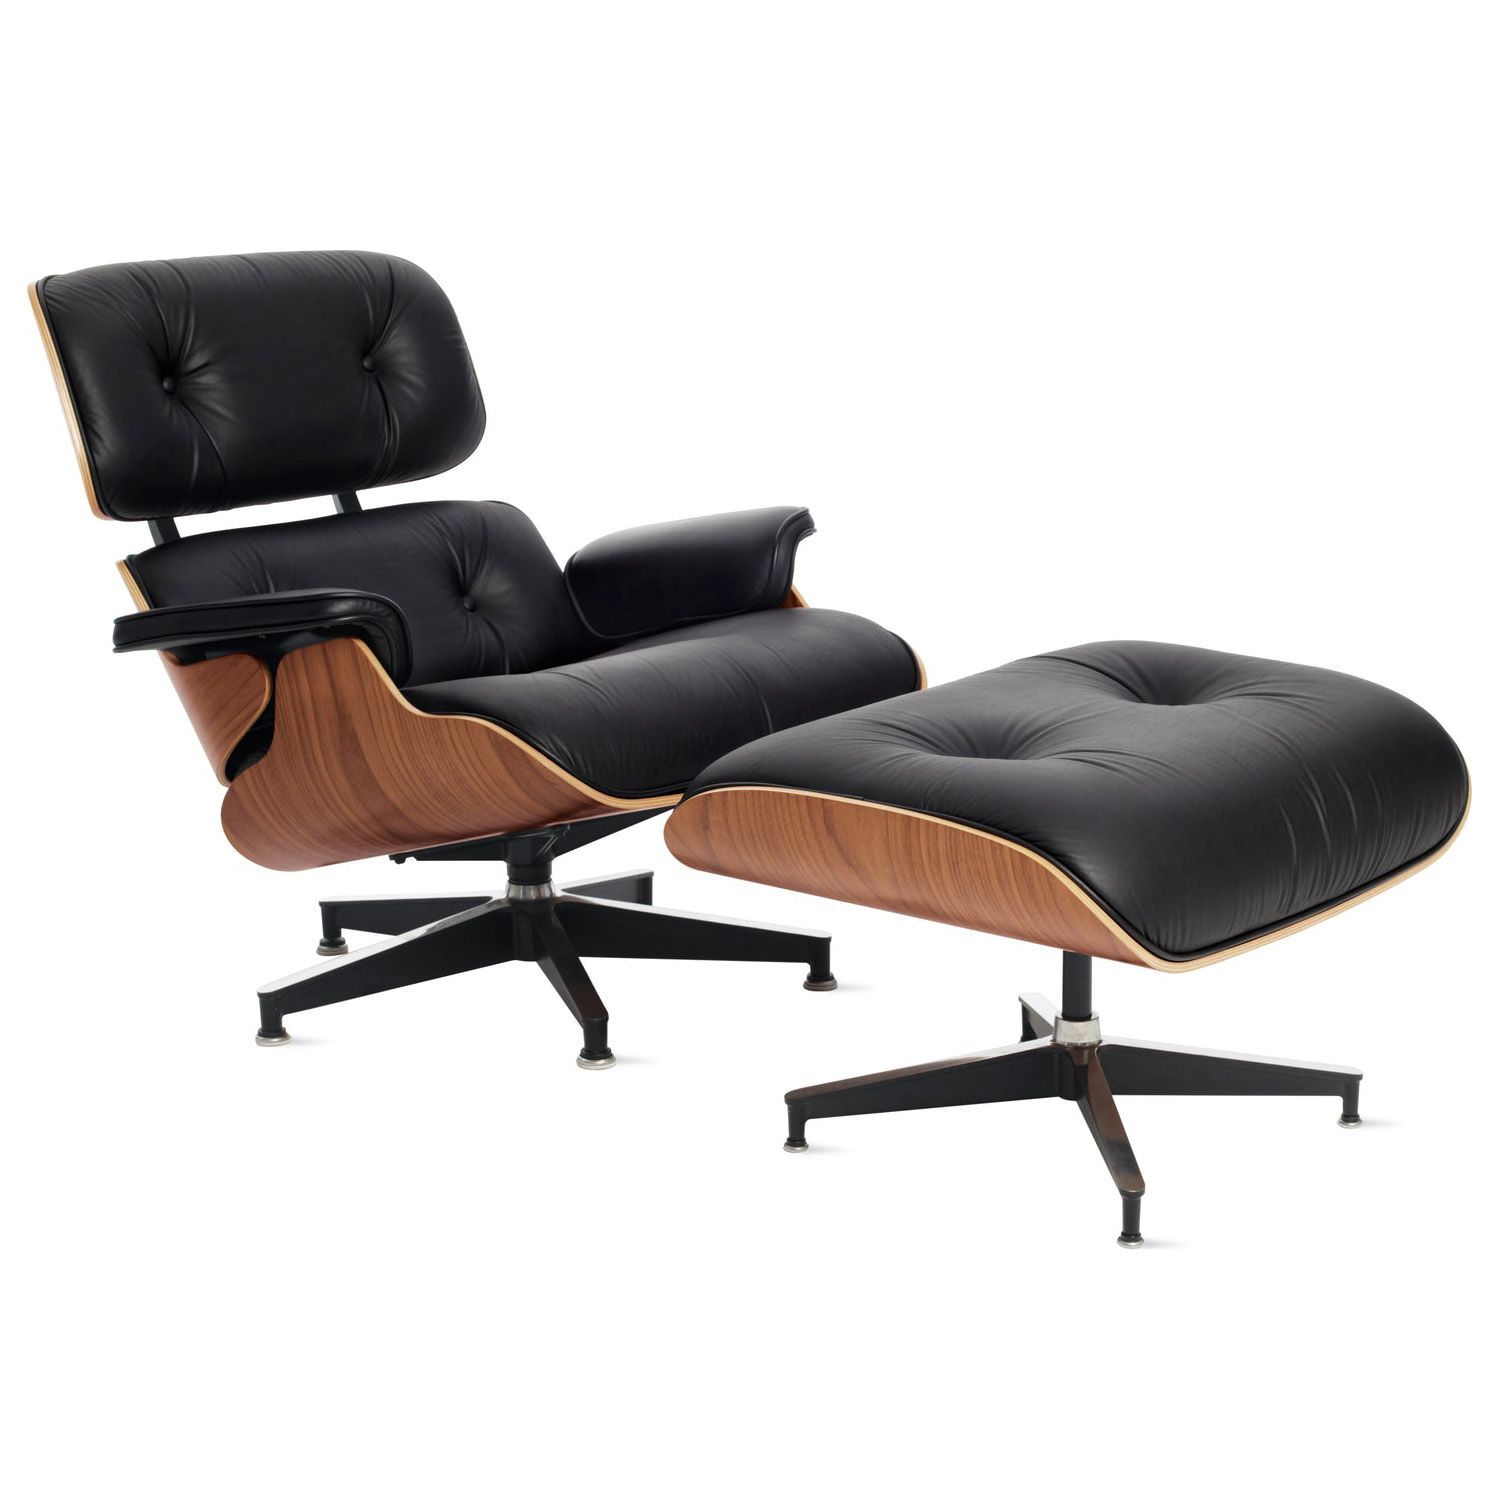 The 25 Best Reading Chairs From Eames to Ikea